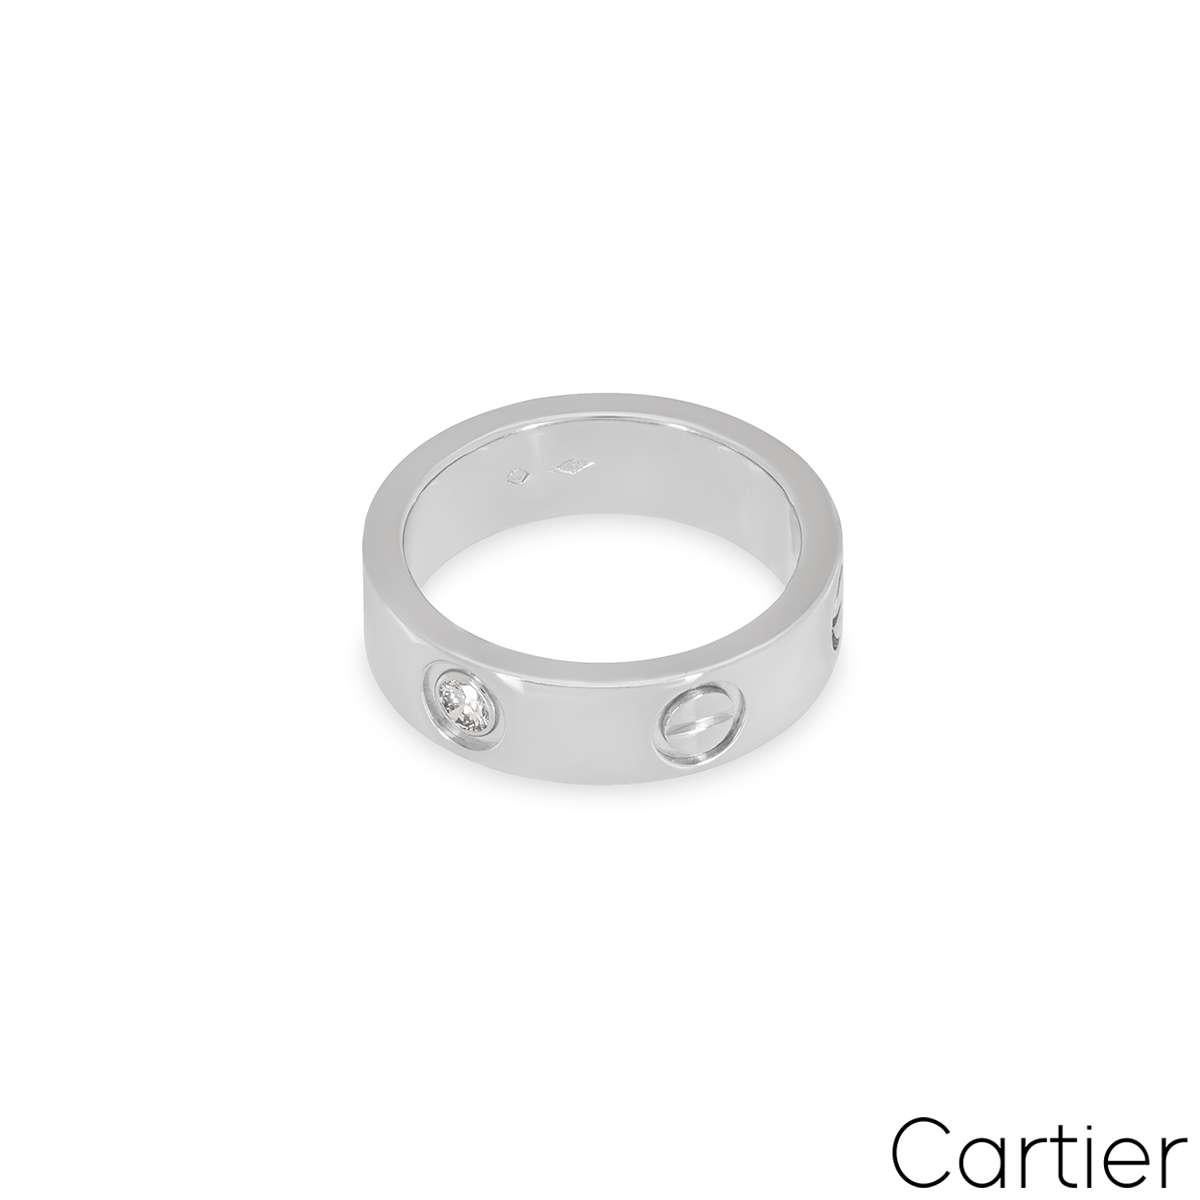 Cartier Platinum Diamond Love Ring Size 51 B4046700 In Excellent Condition For Sale In London, GB